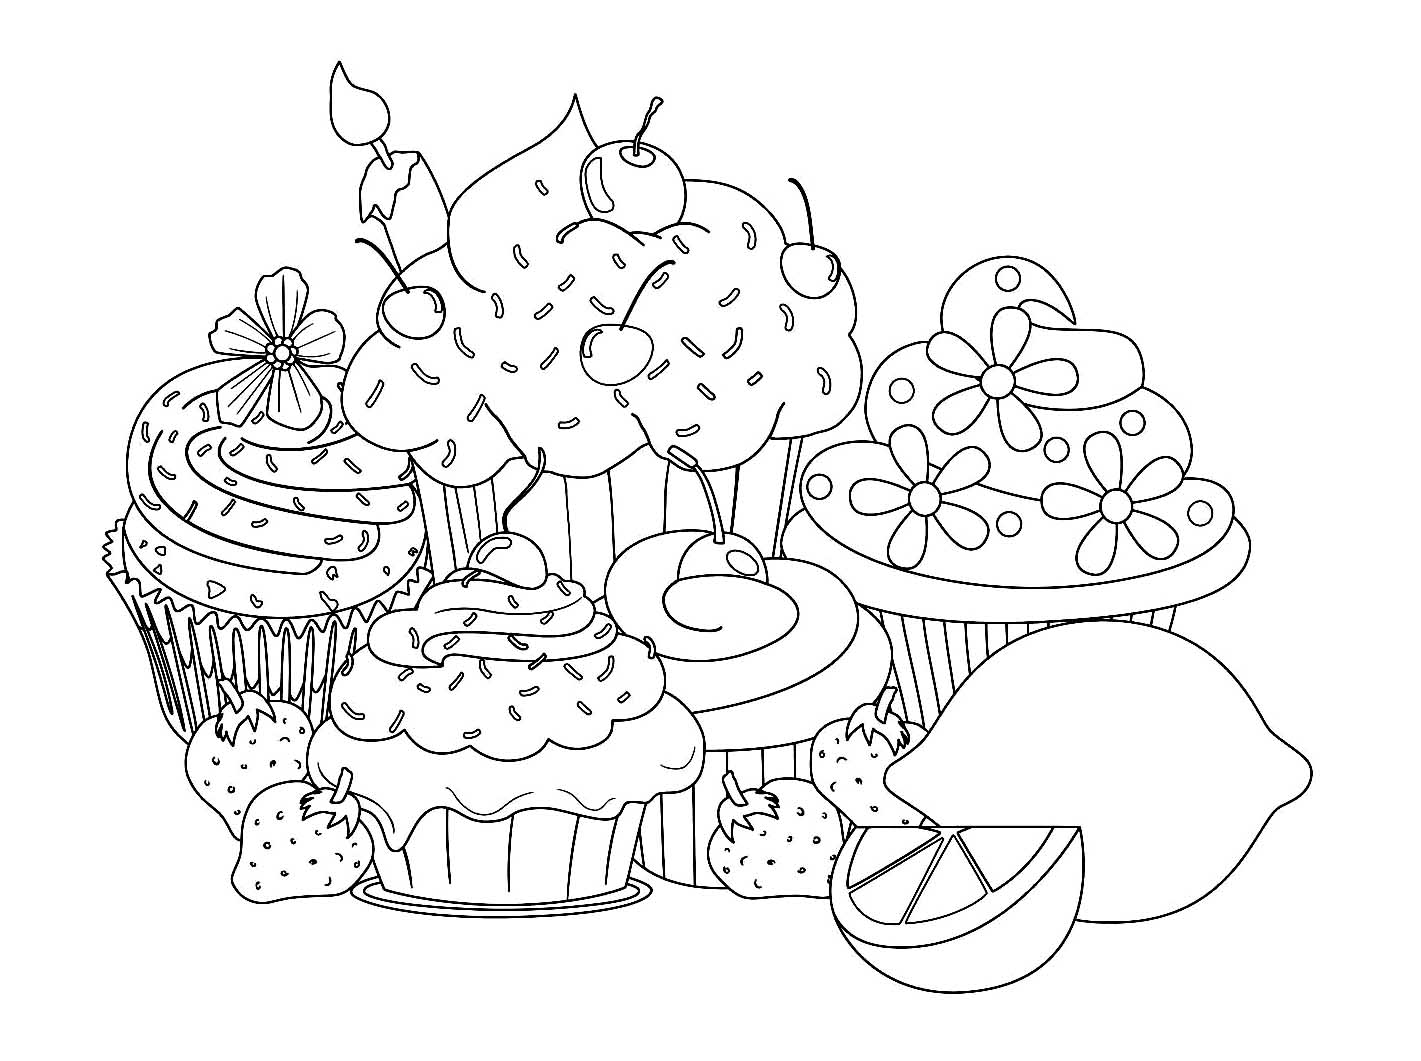 Coloring Pages Of Cakes And Cupcakes - boringpop.com